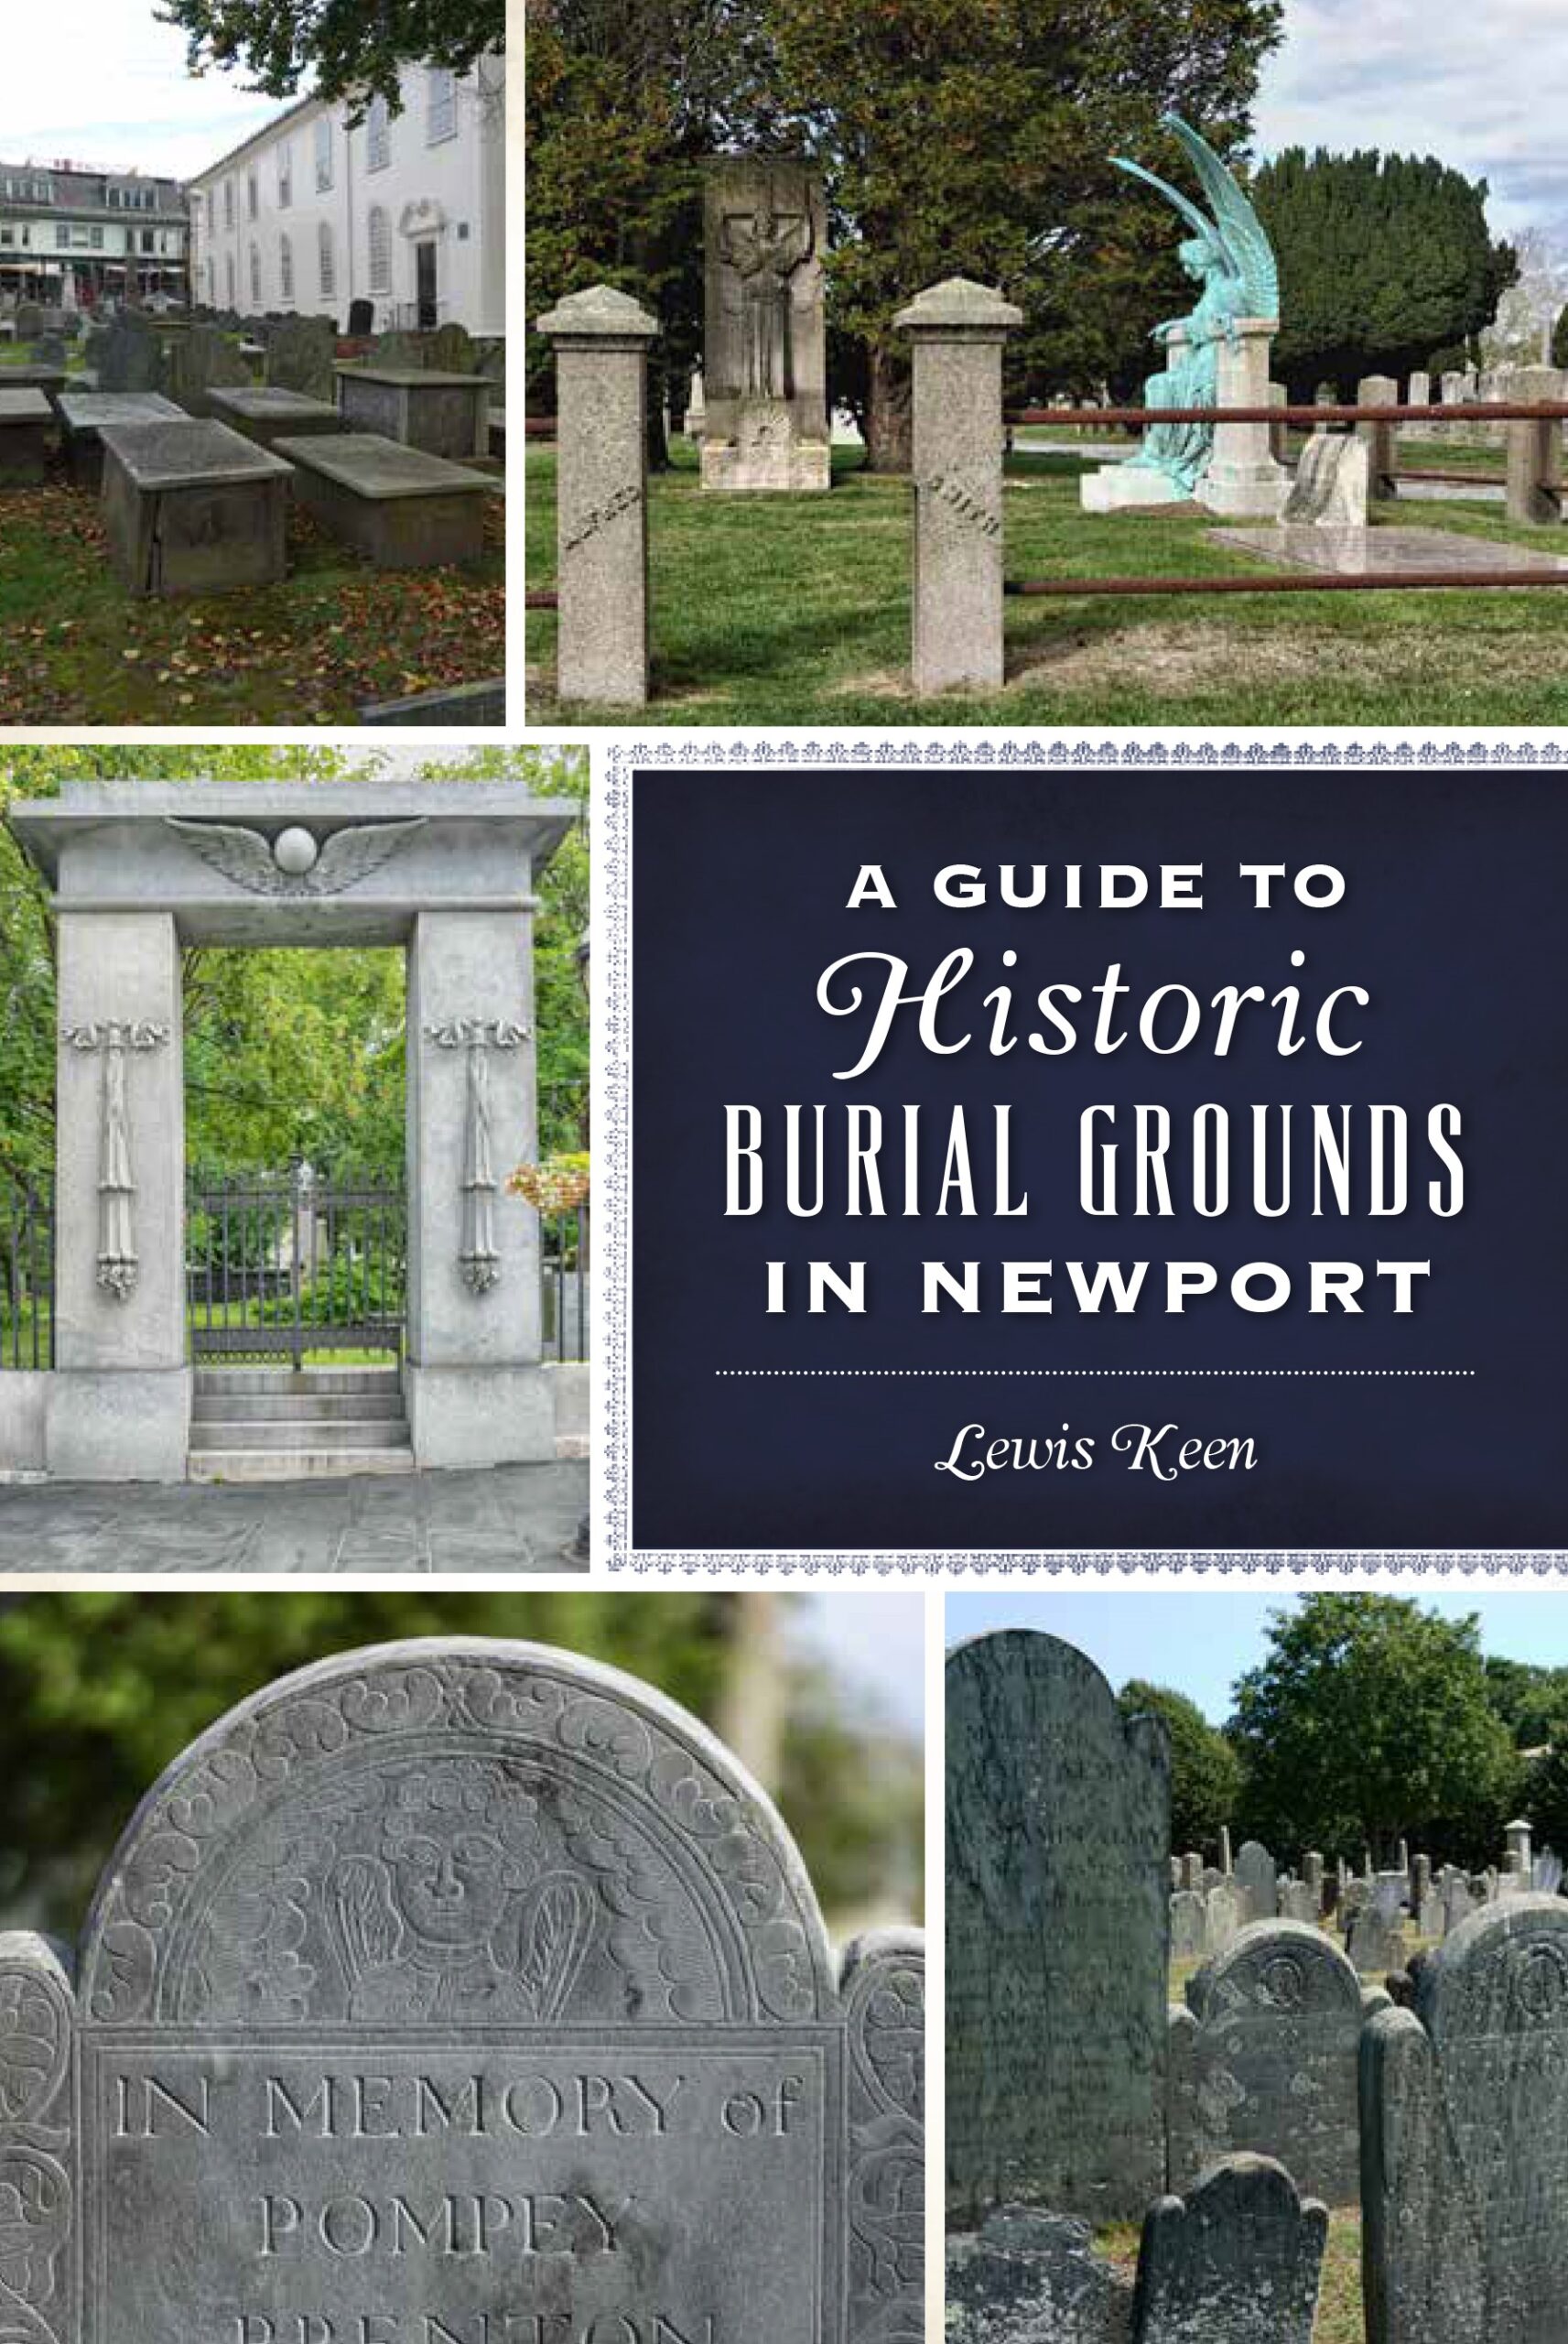 Resting in Peace in Newport: Monuments From the Past Lessons for the Present